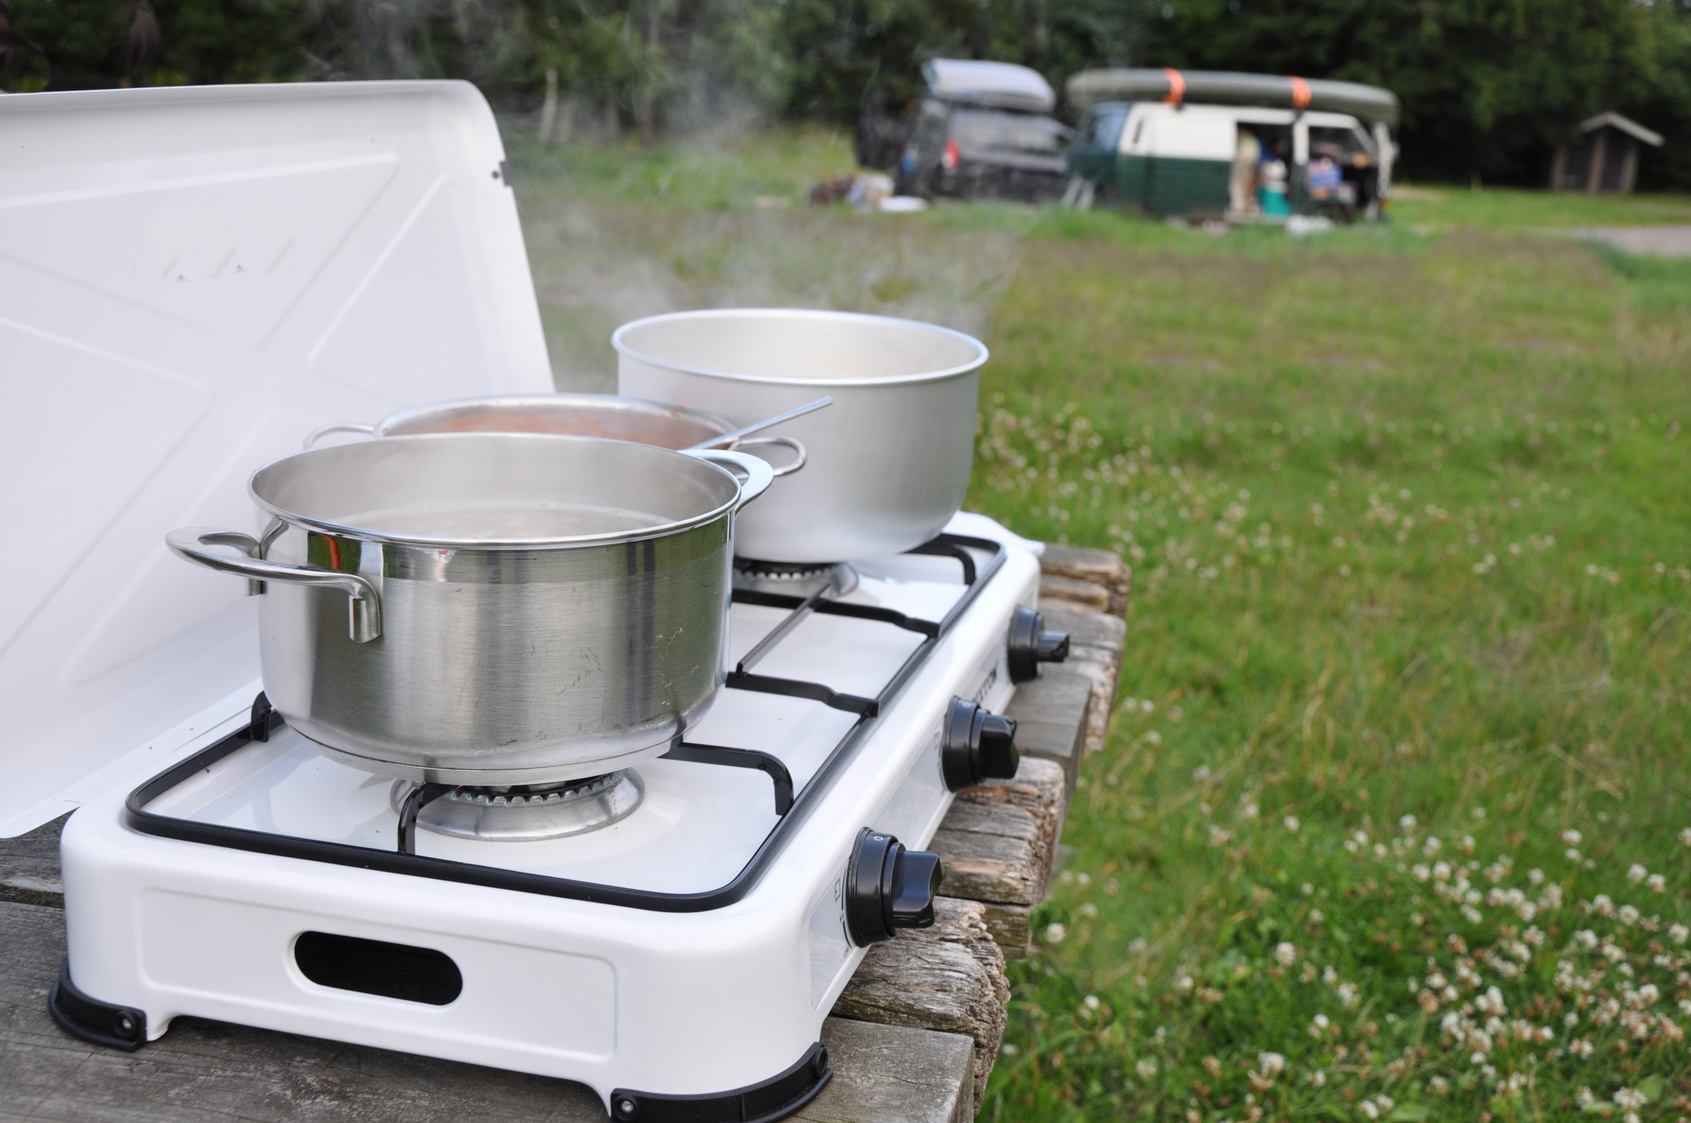 Bin The Beans – Cooking While Caravanning